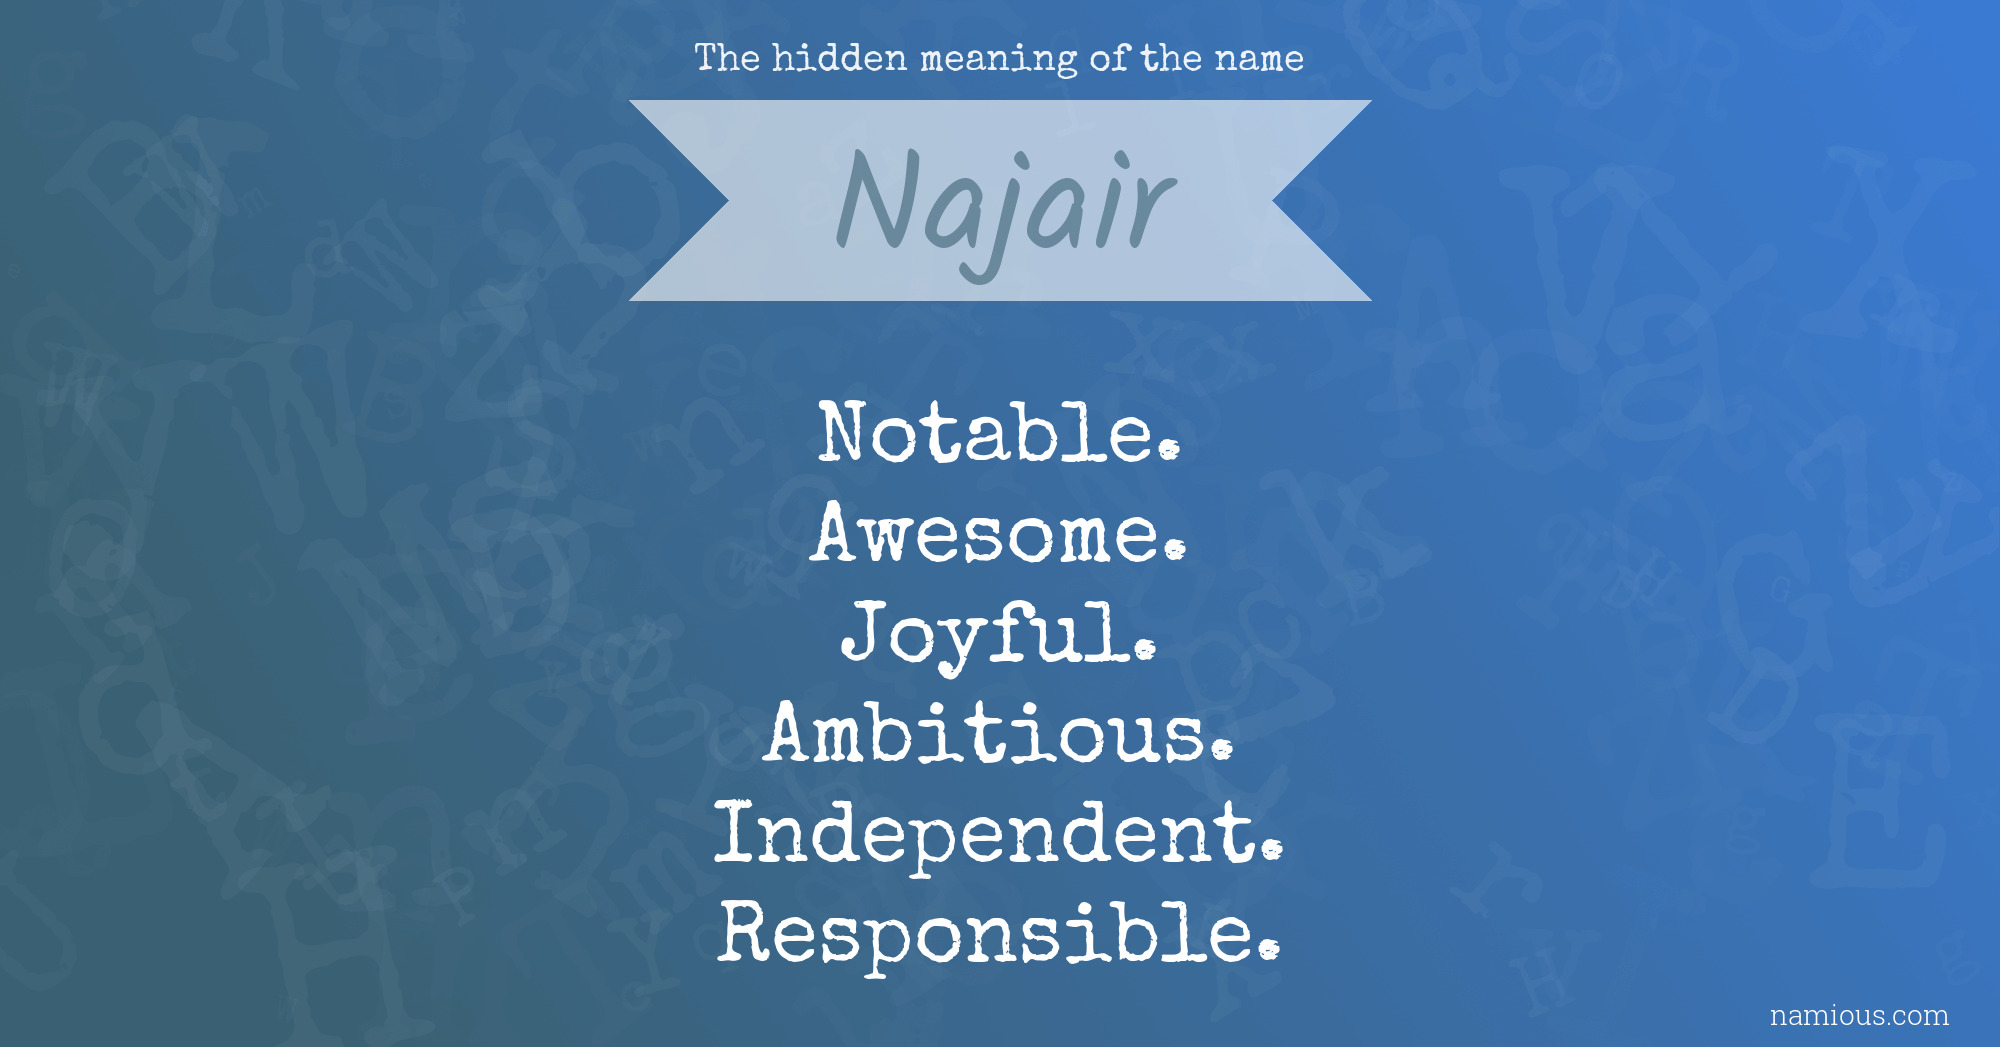 The hidden meaning of the name Najair